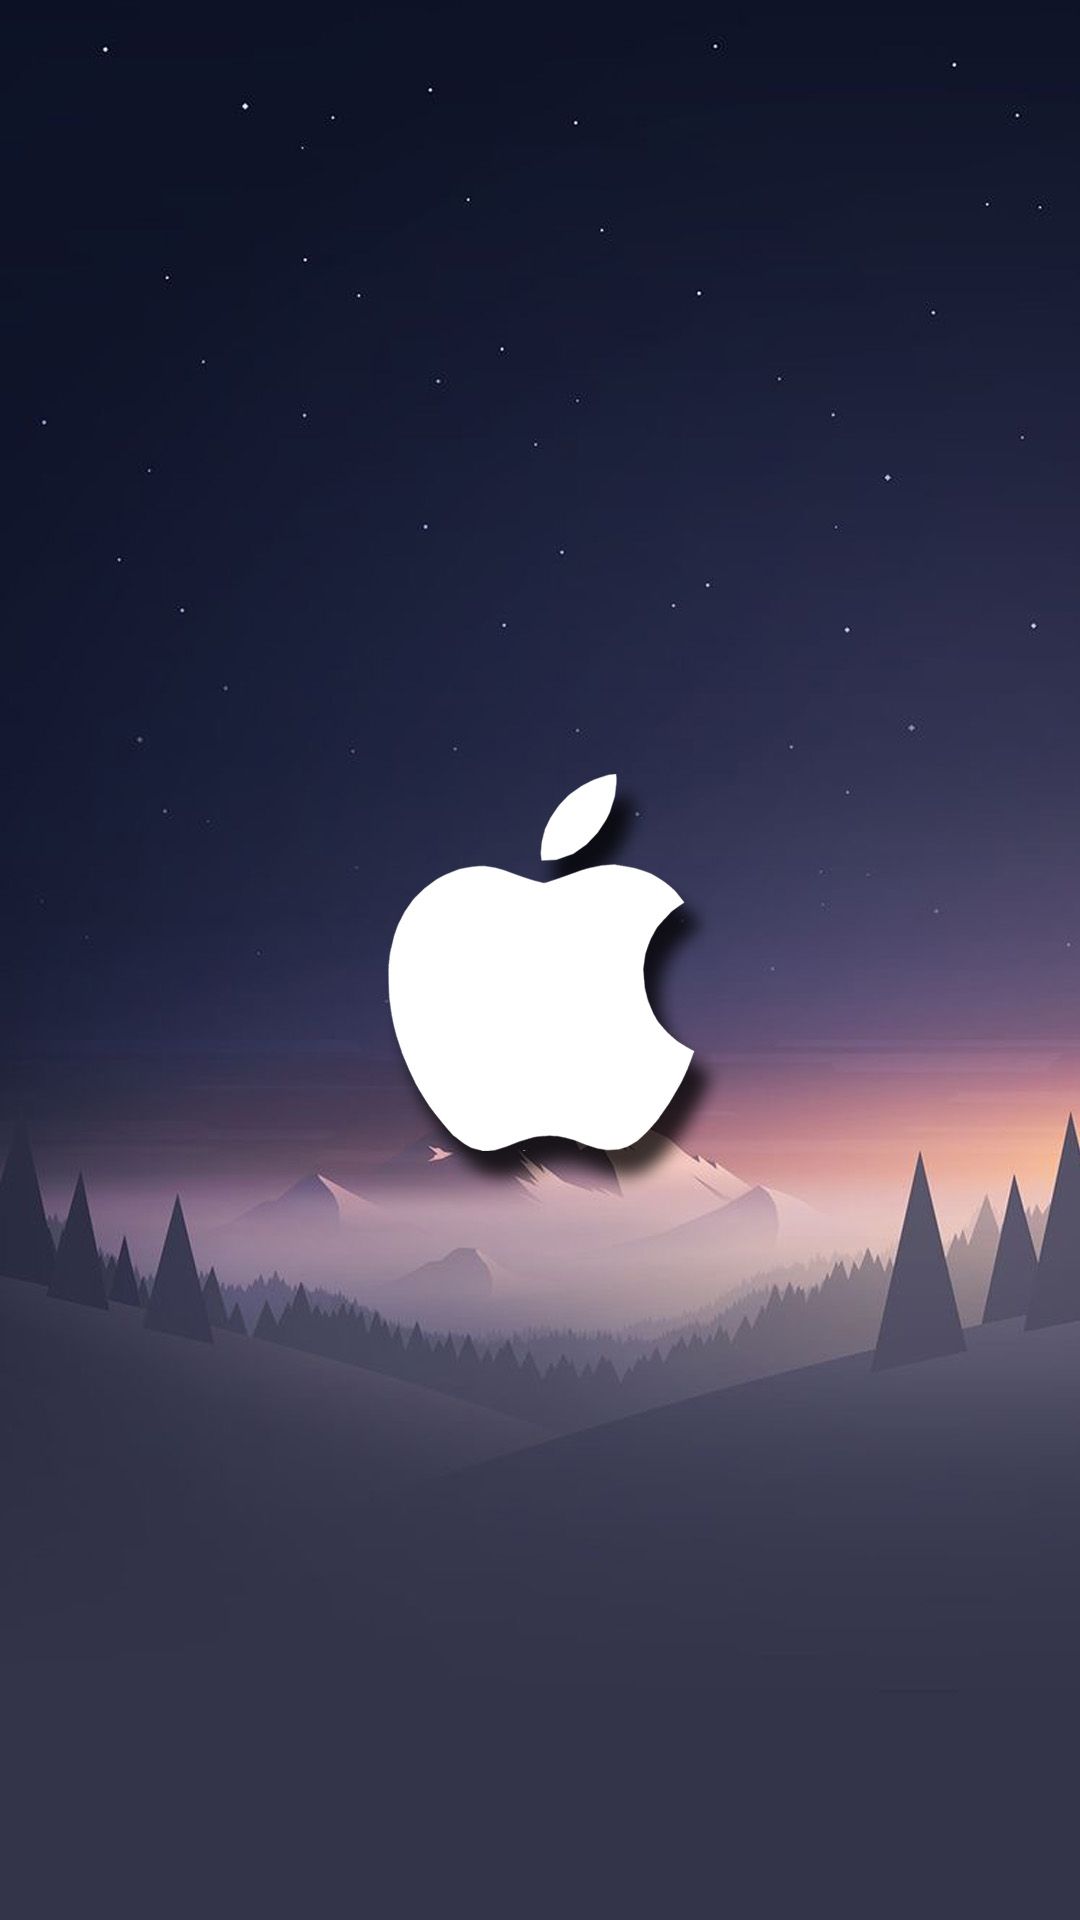 Take a look at. Apple logo wallpaper iphone, Apple wallpaper iphone, Apple logo wallpaper